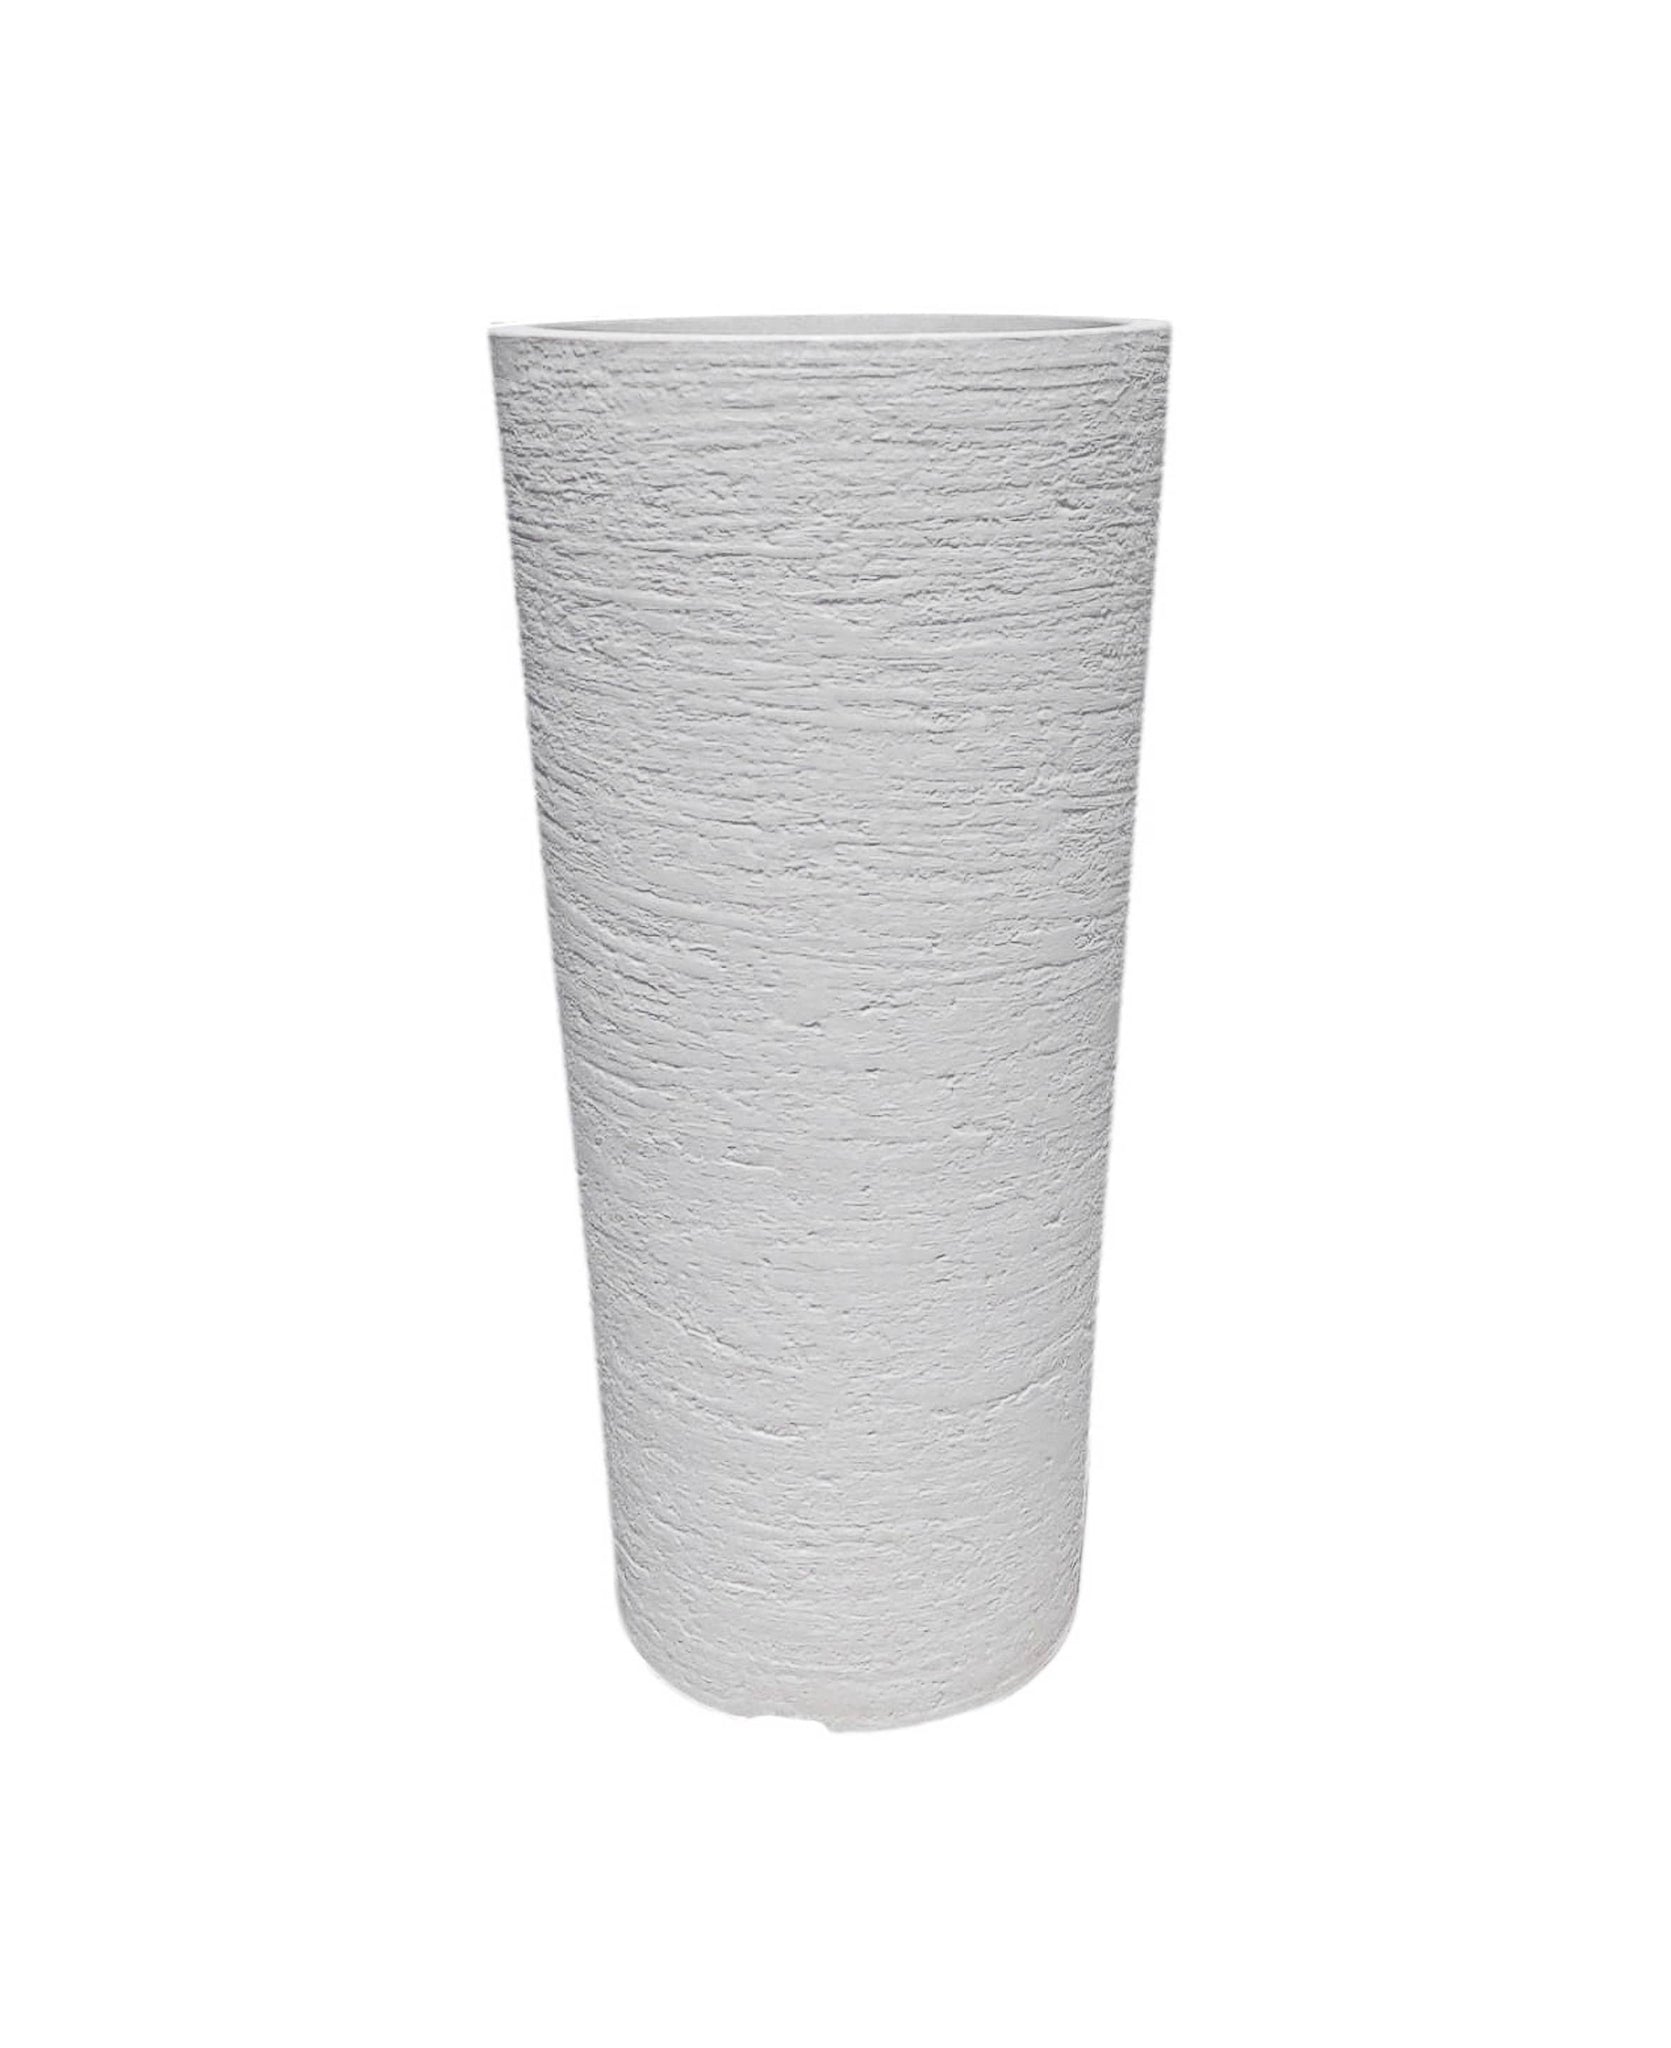 Meduim Tall plant pot, slim with a textured finish. The European Conic Japi planter shown in the colour Sandstone is suitable with any style of decor. Fits in to narrow spaces. Florastyle by Hingham.